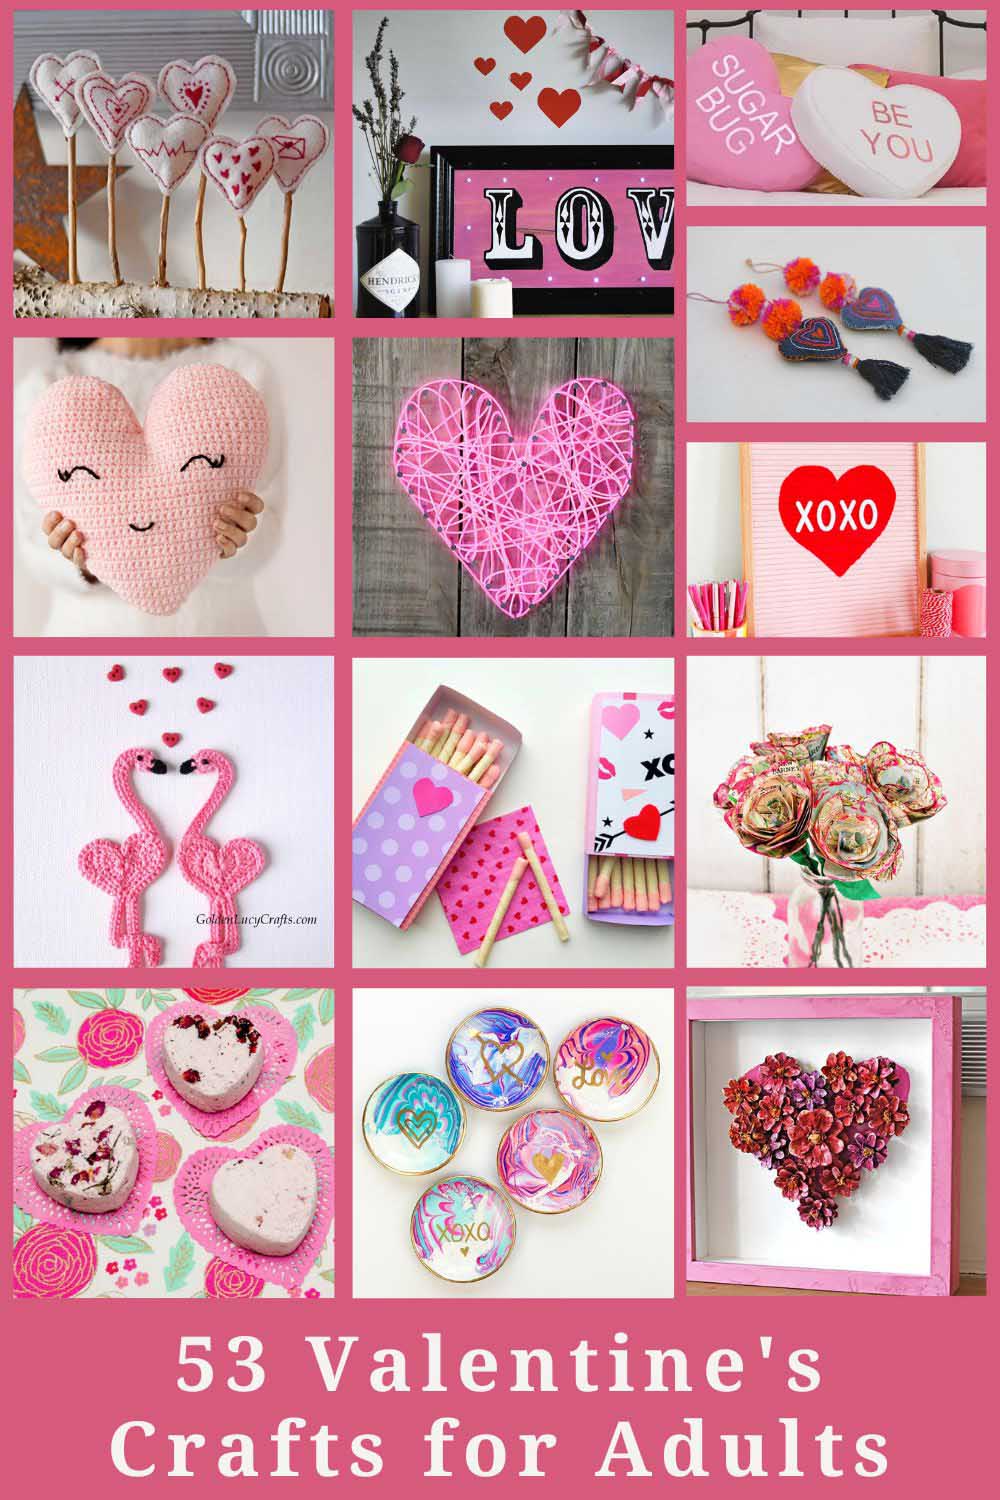 53 Valentine crafts for adults